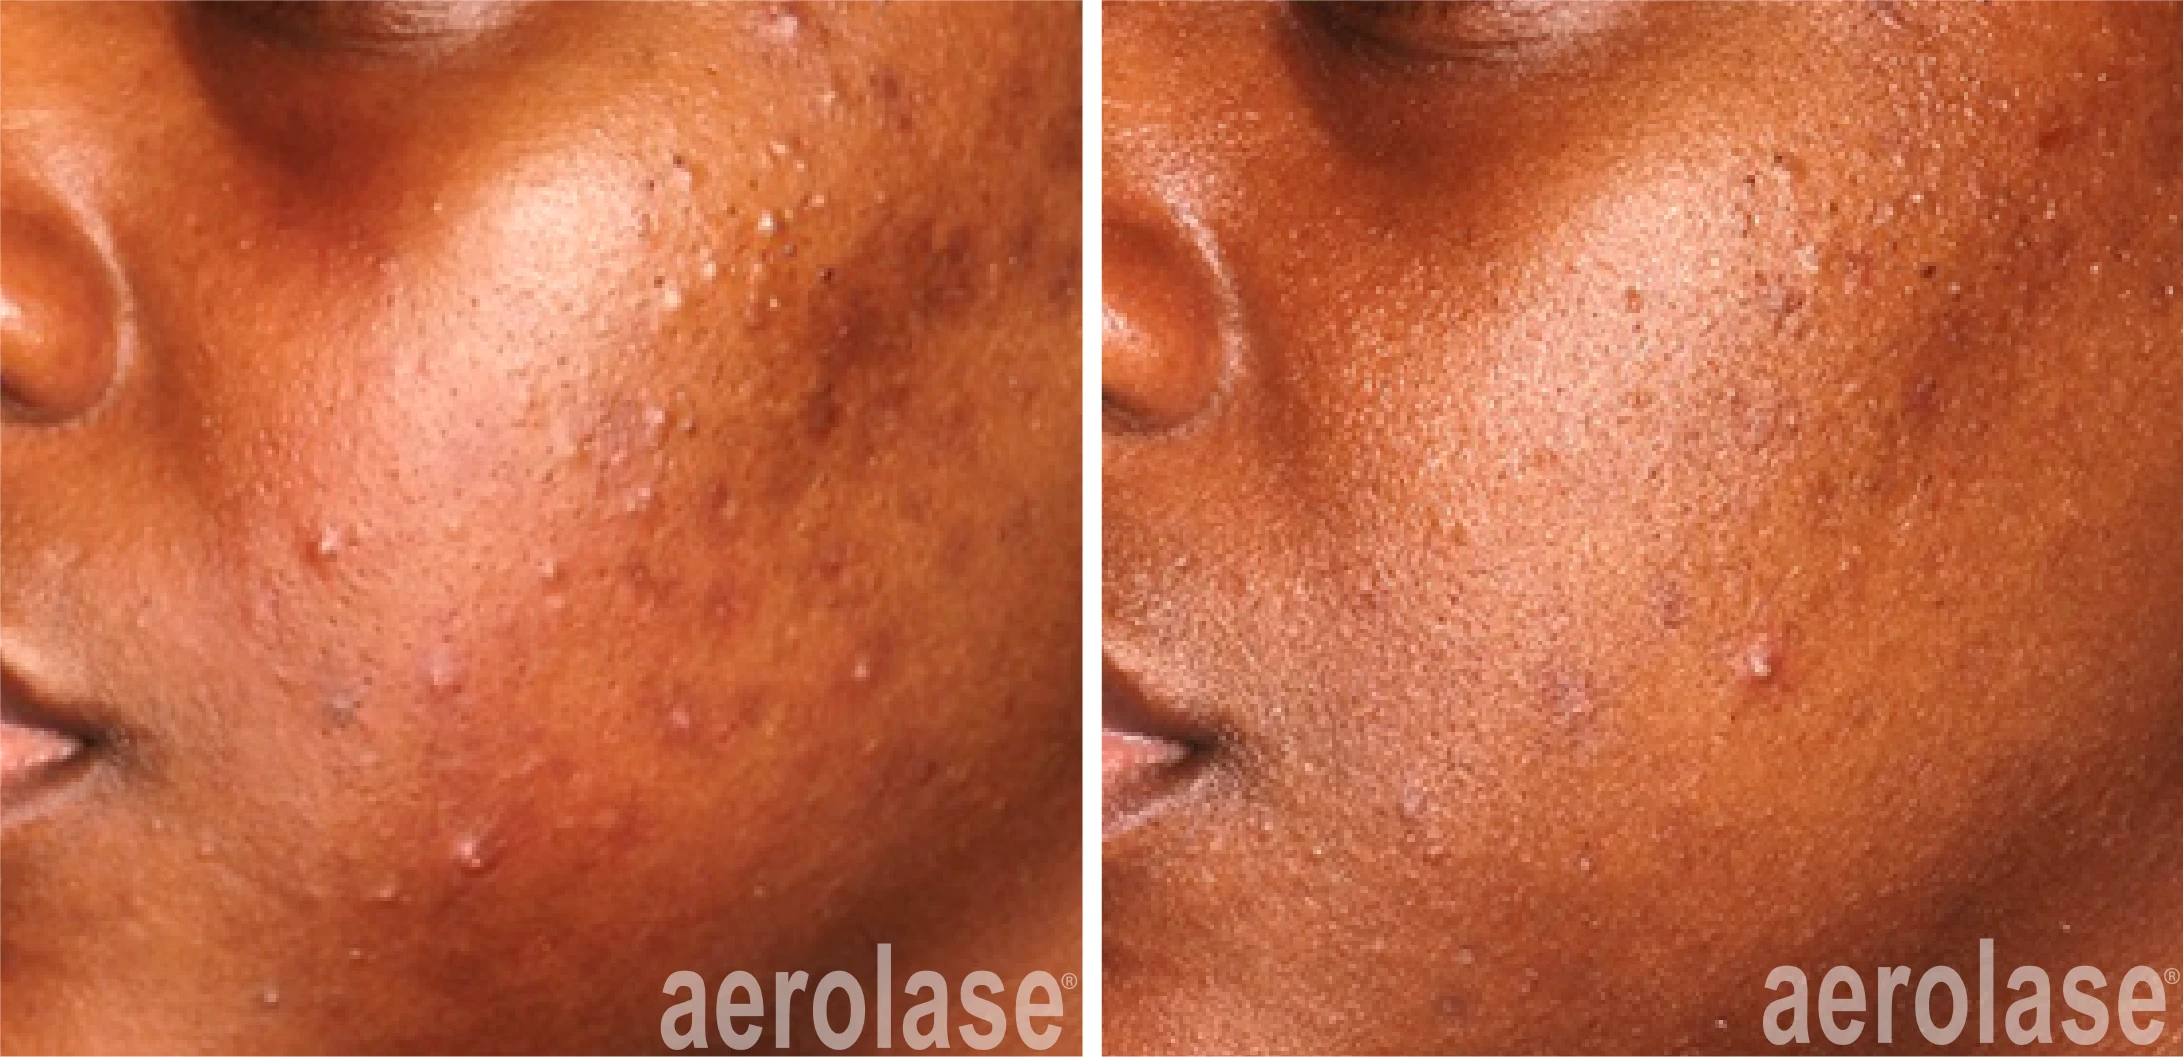 aerolase-before-after-michelle-henry-4-treatments